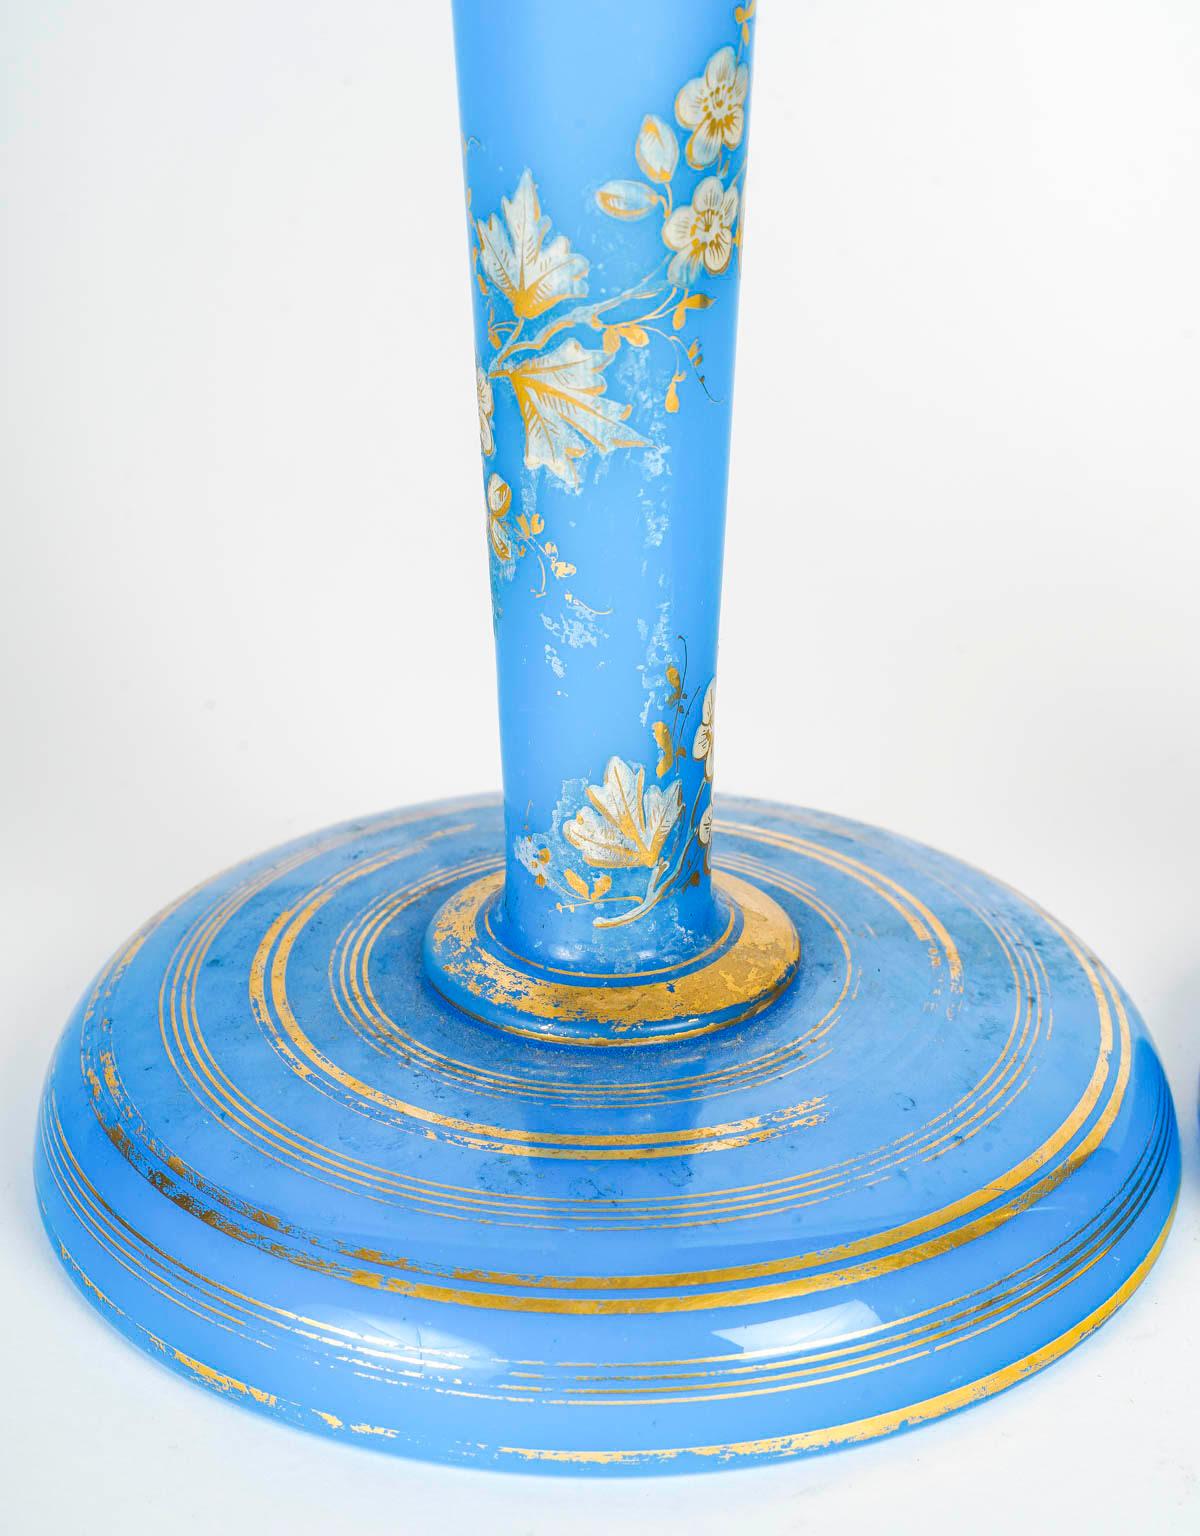 French Pair of Blue Opaline Vases, 19th Century, Napoleon III Period.